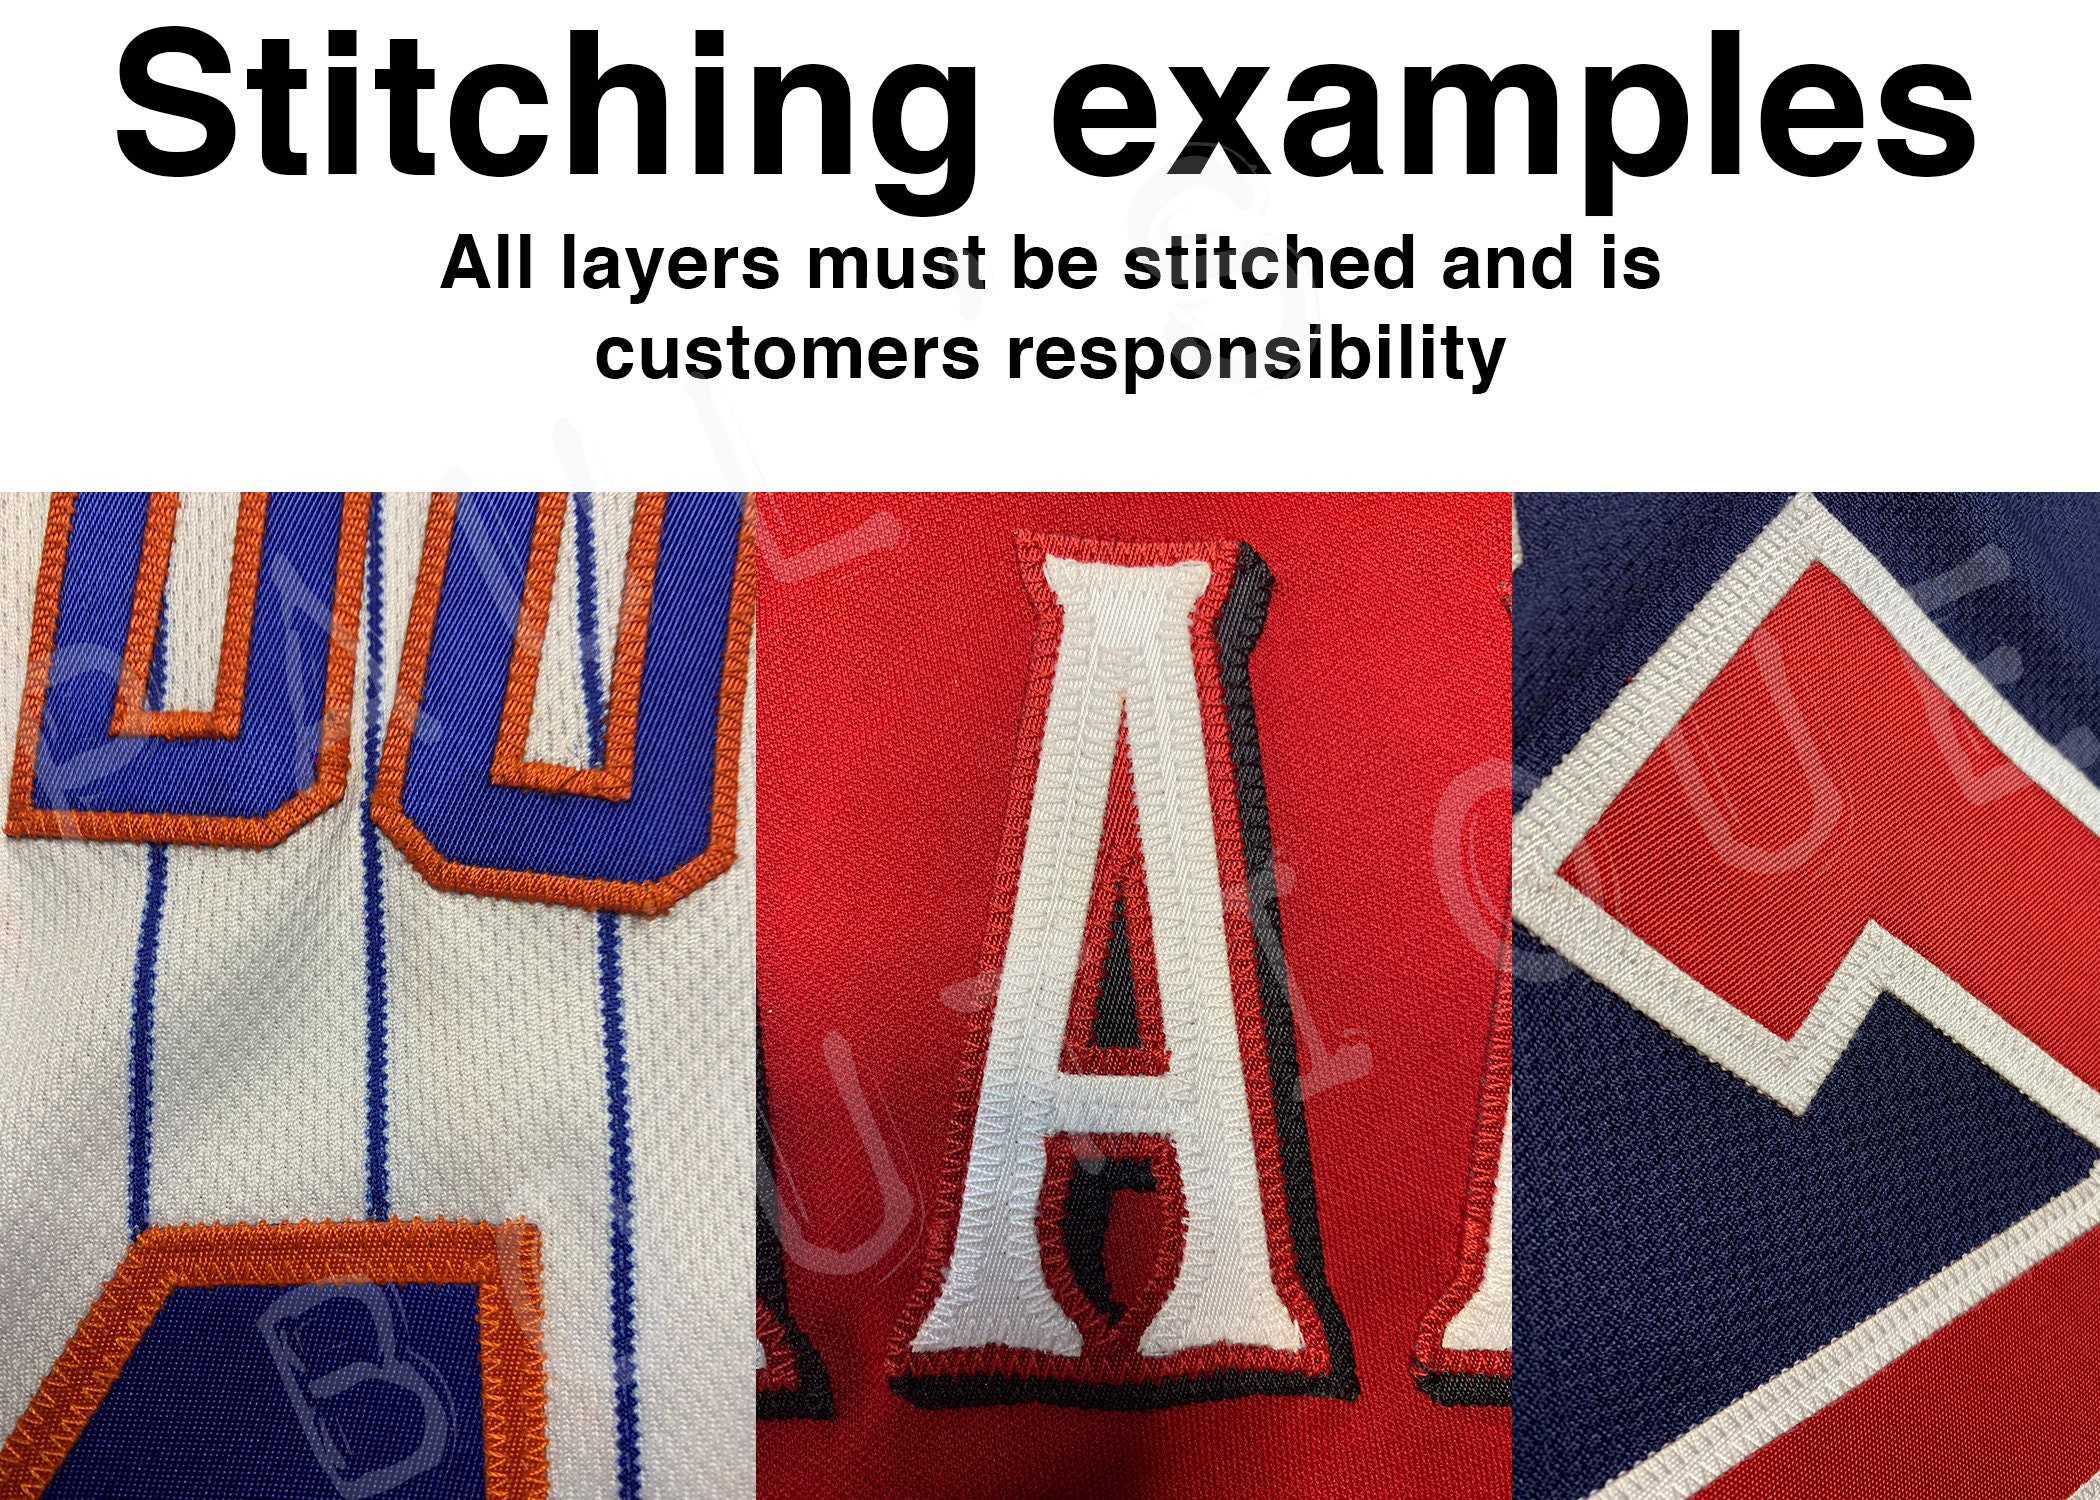 Red Sox Switching Back To Red Lettering On Road Jerseys - CBS Boston